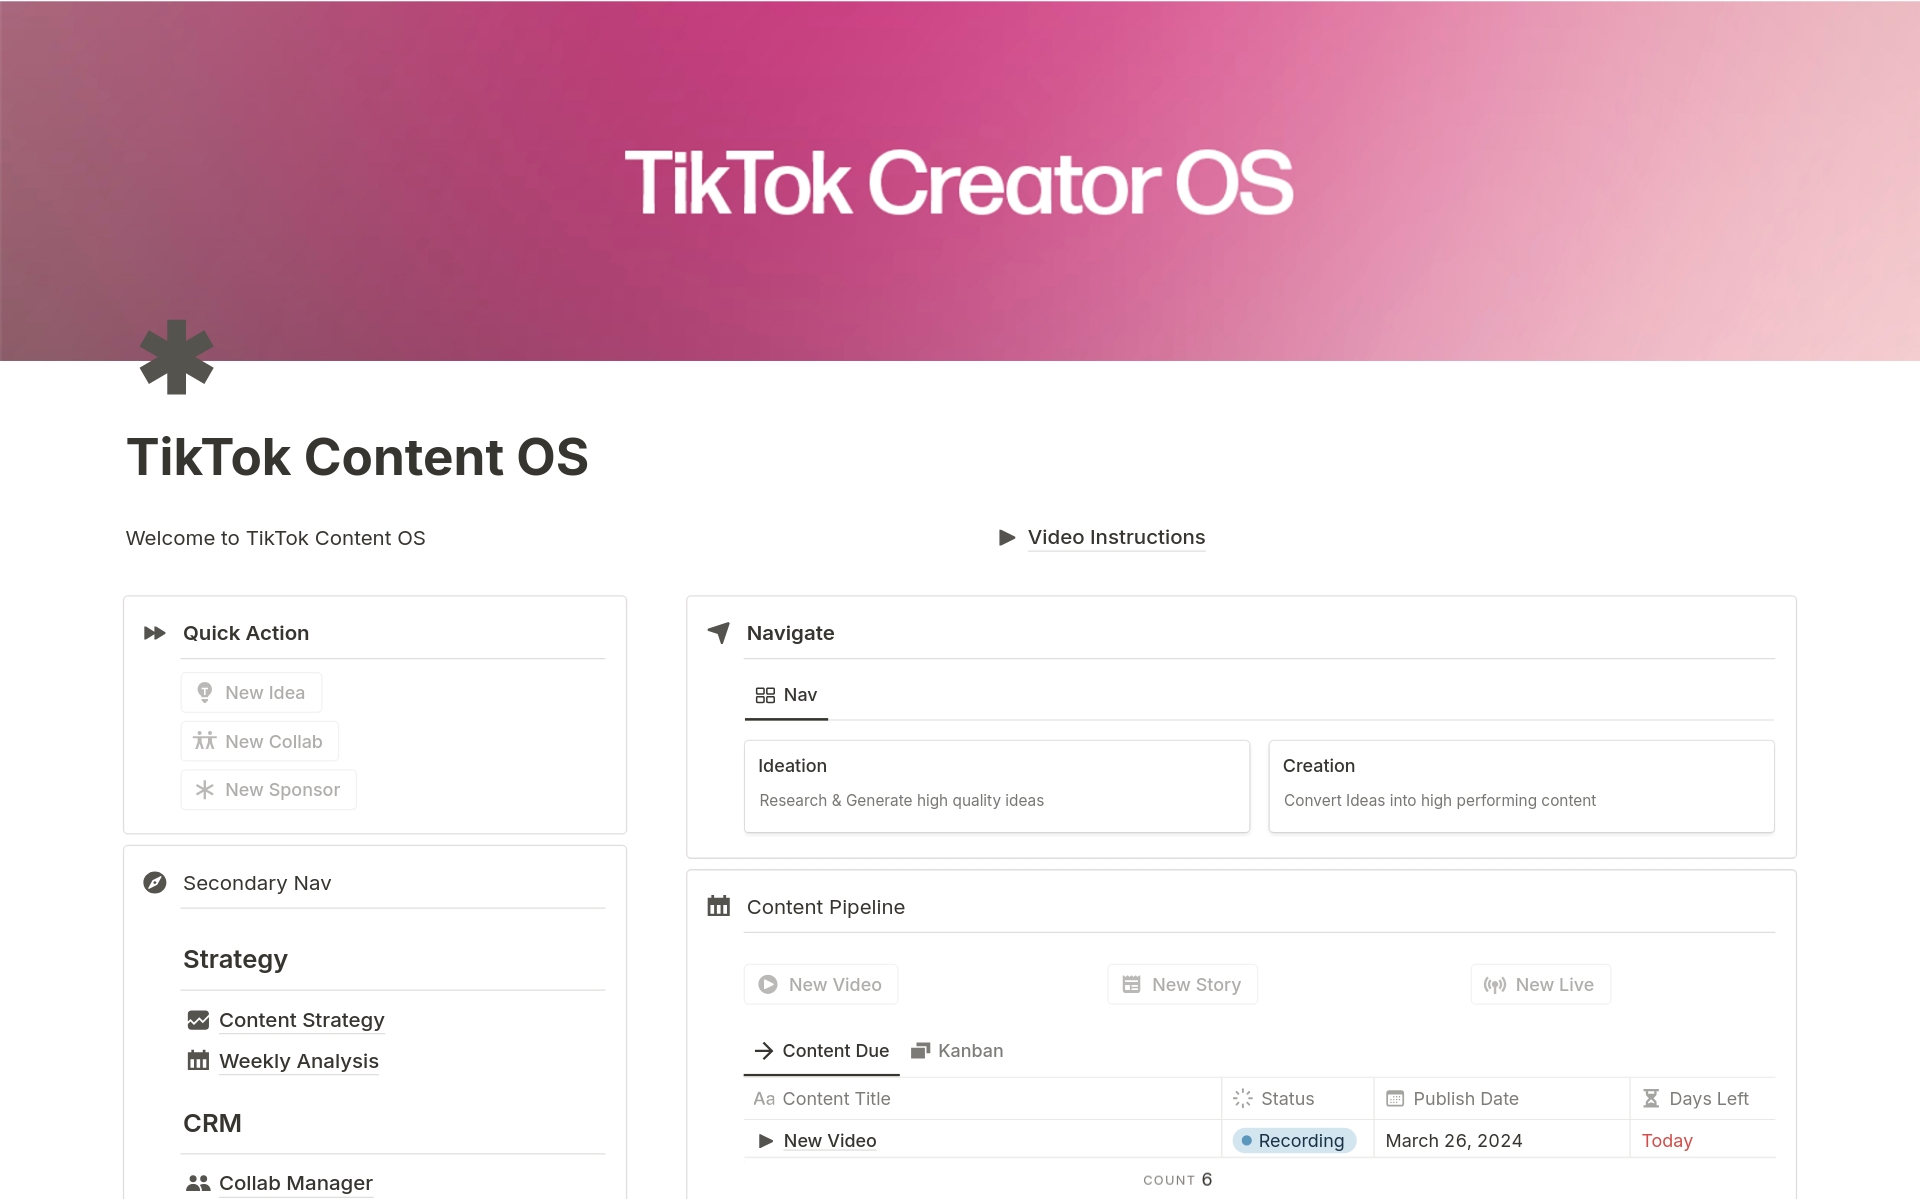 Save hours on planning and disorganized content creation for your TikTok creator business with an AI-Powered Notion template